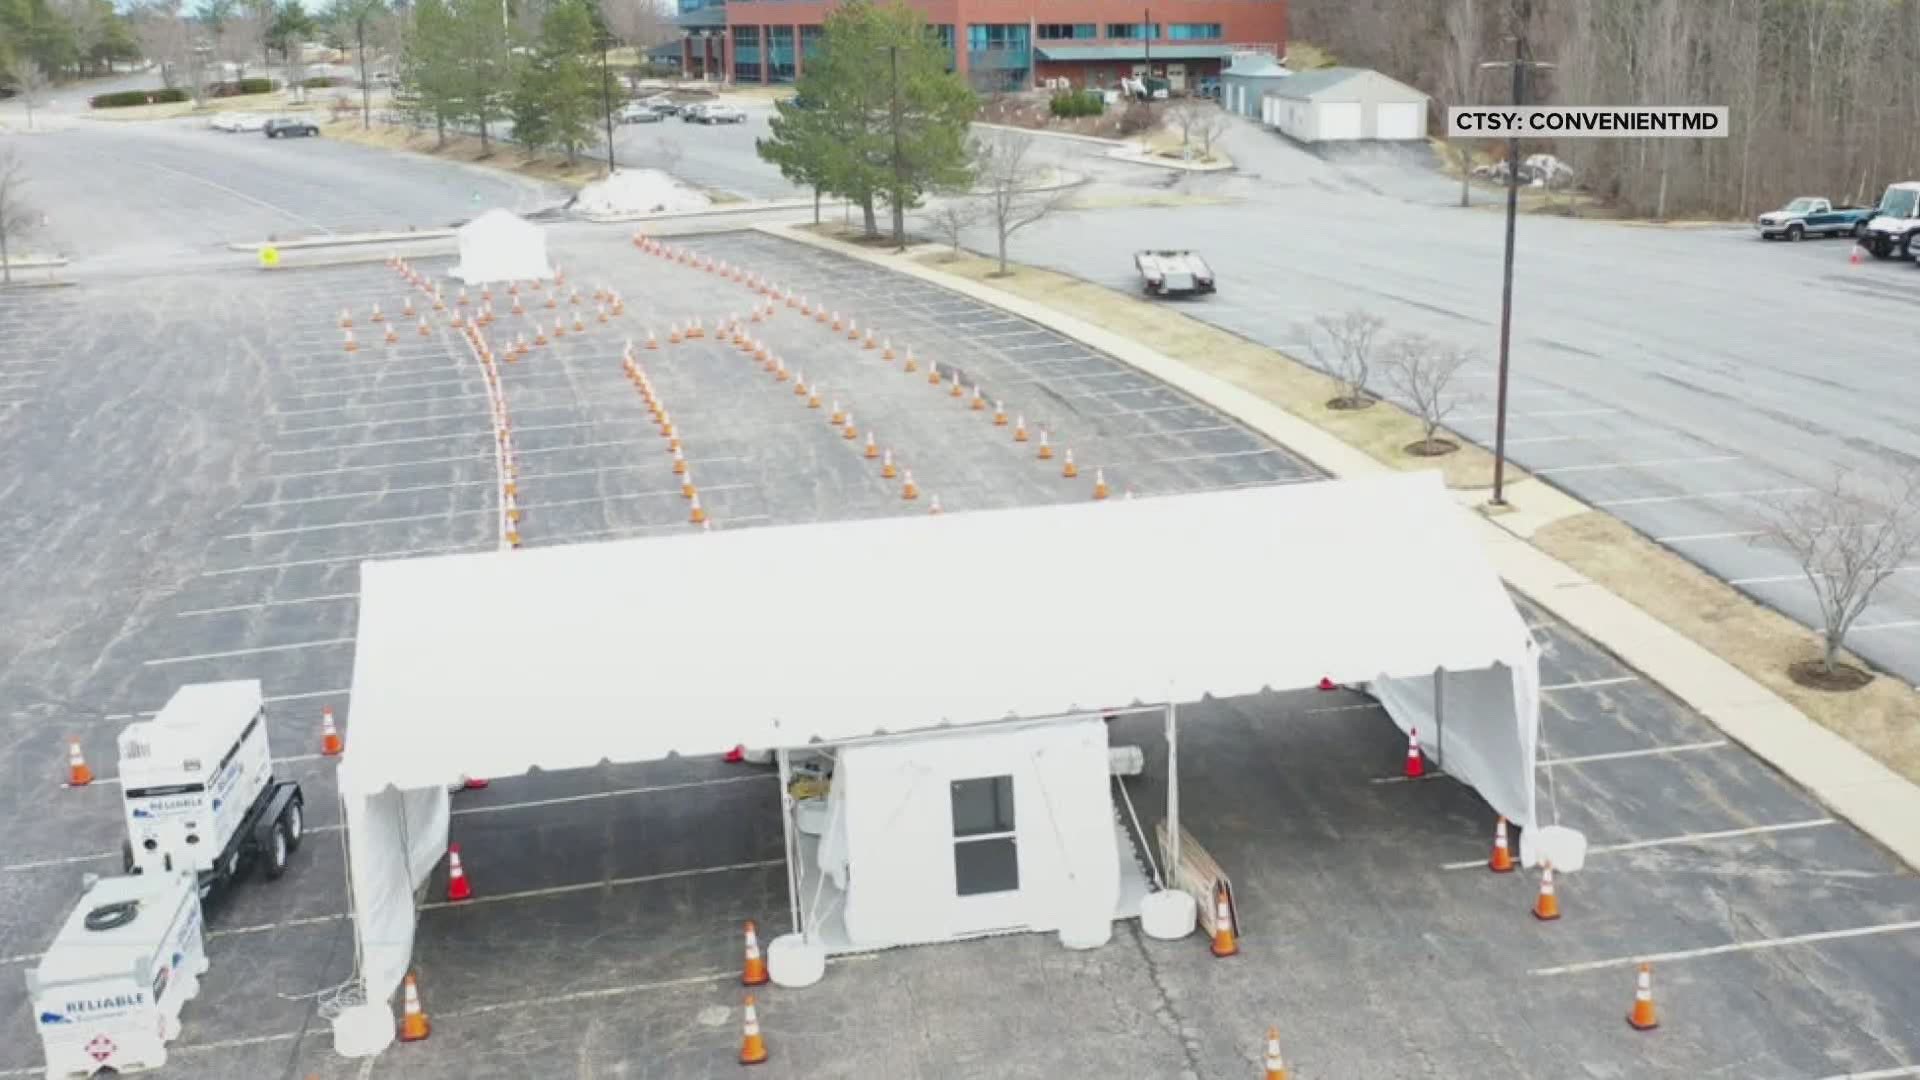 MD telehealth patients will have access to drive-thru coronavirus testing in South Portland.